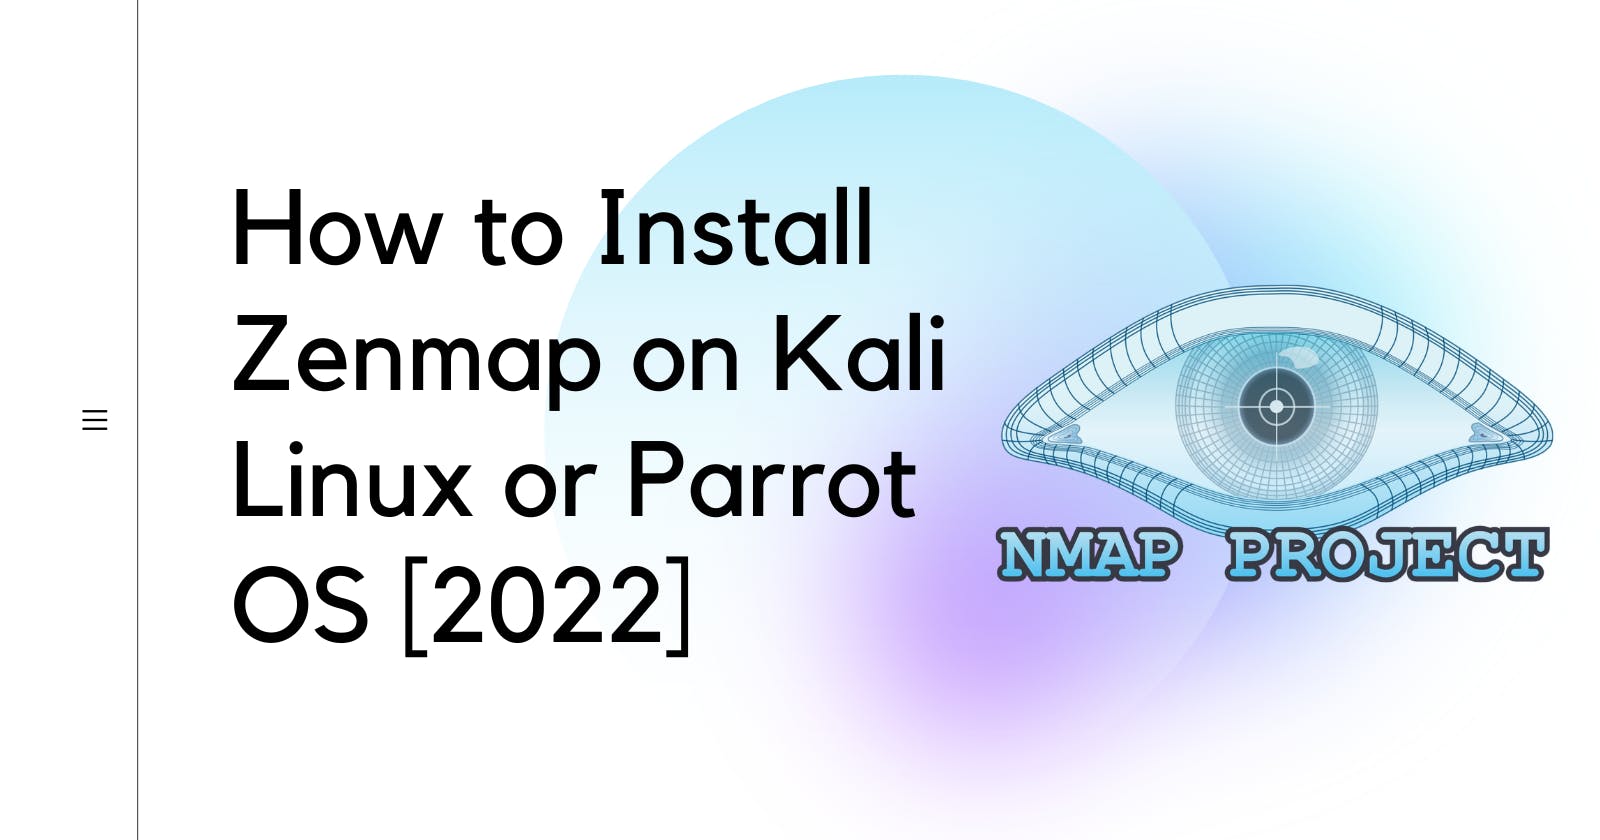 How to Make Zenmap Work on Kali Linux or Parrot OS [2022]